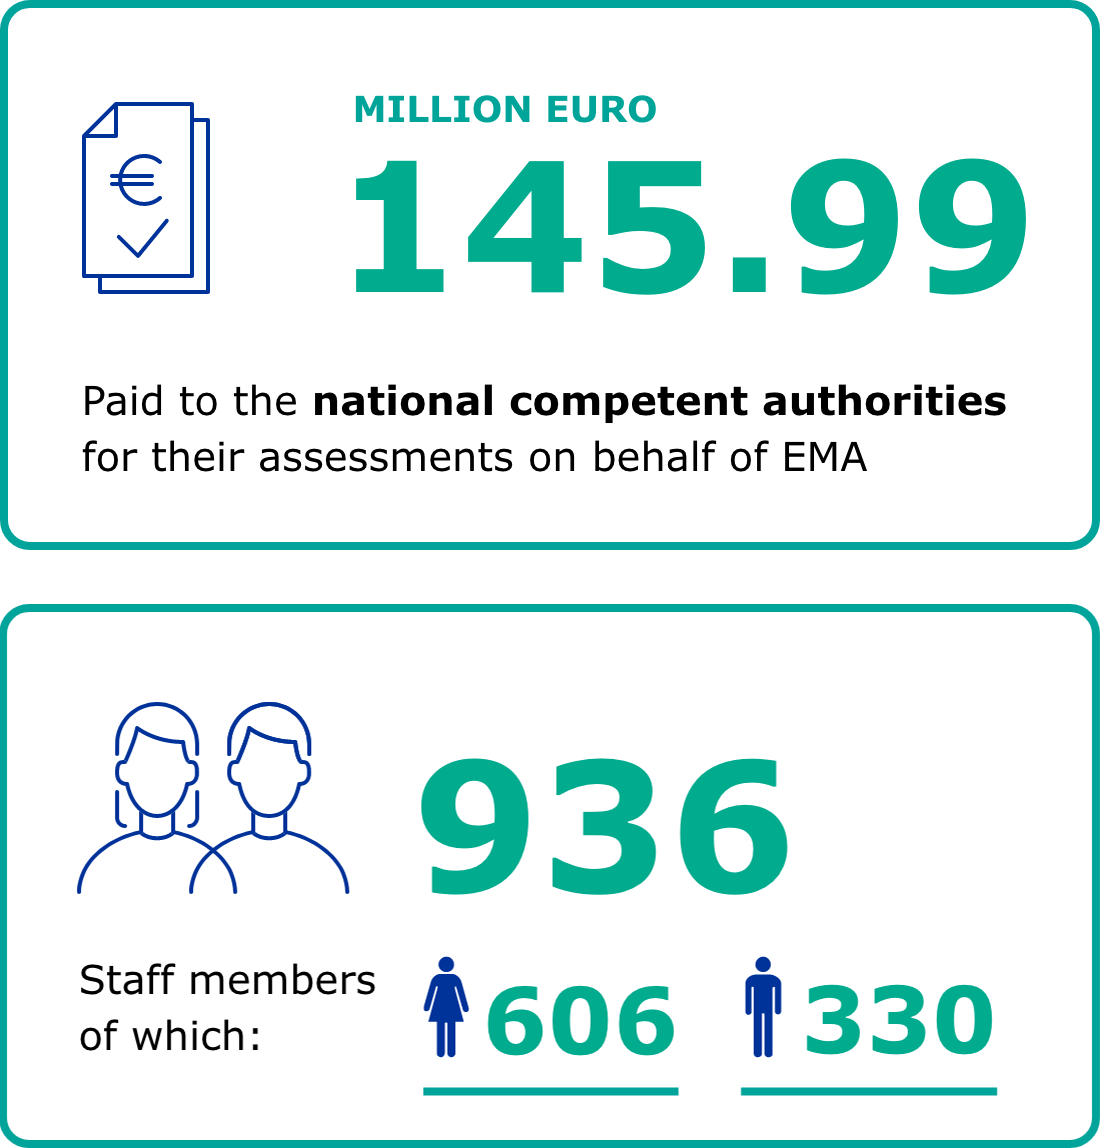 Over 145 million euro paid to national competent authorities for their assessments on behalf of EMA. 936 staff members